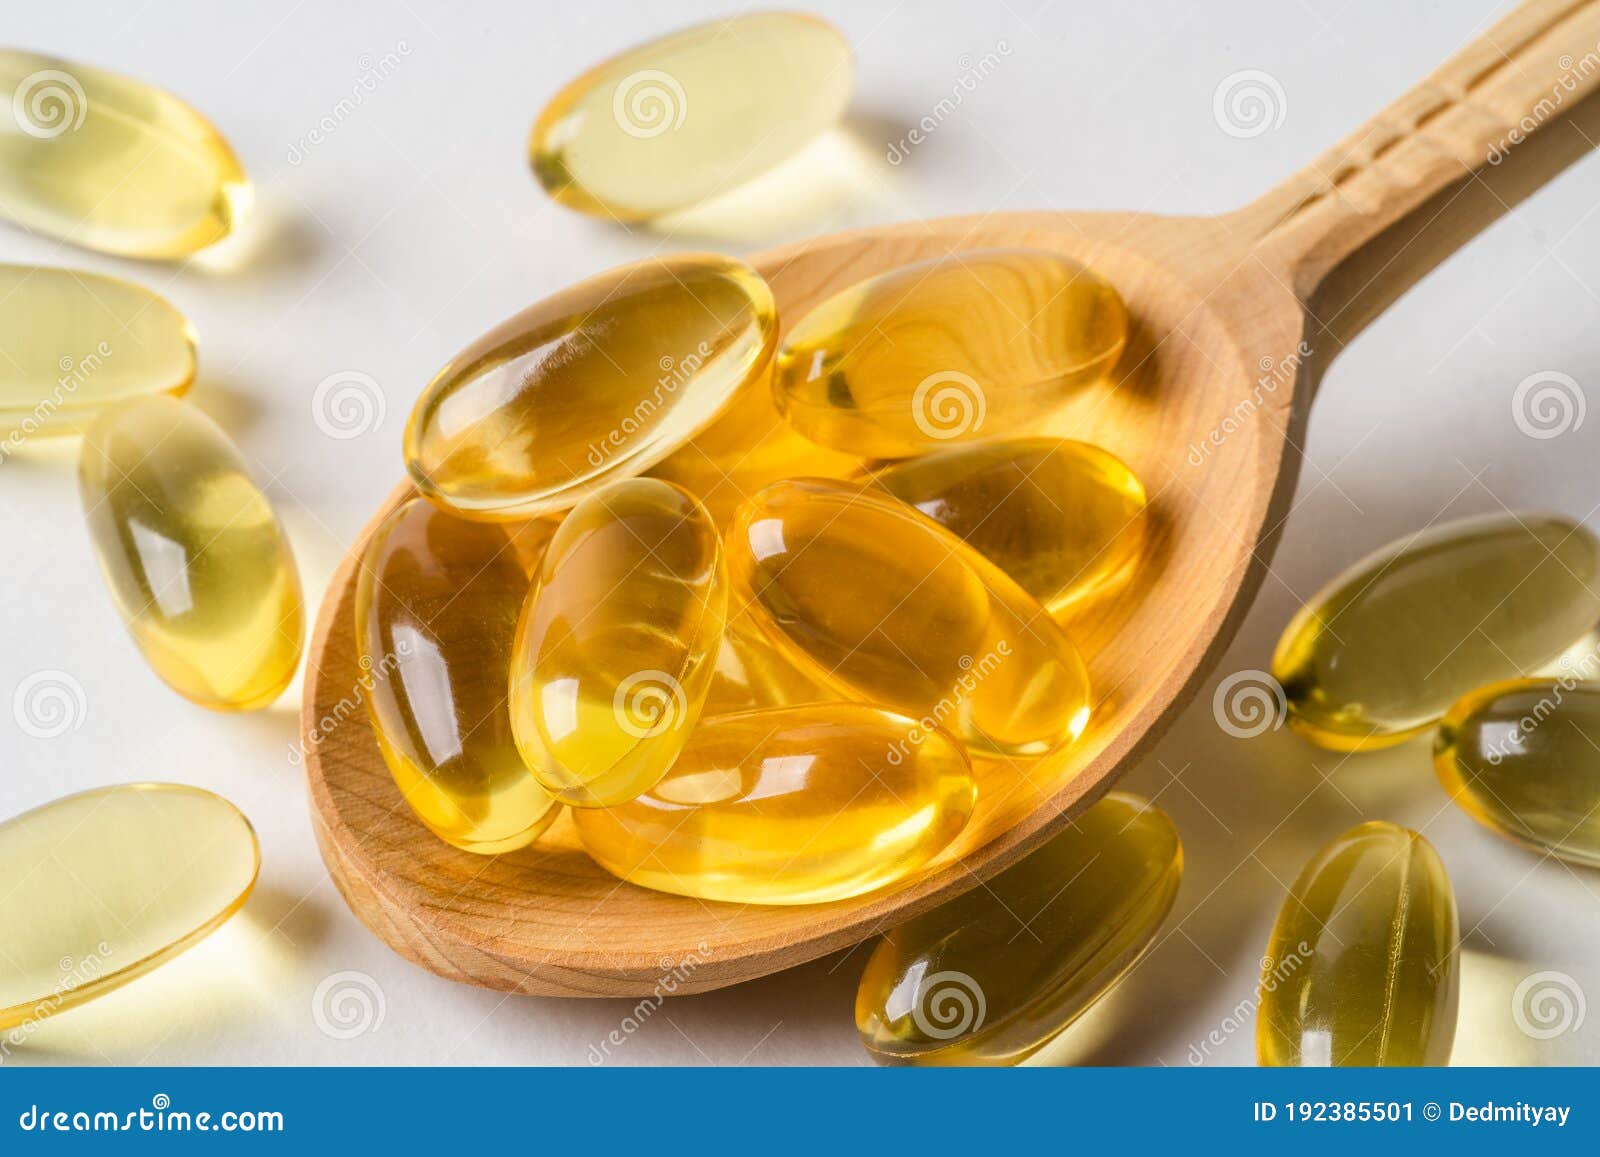 omega 3 yellow capsules in wooden spoon on white background. epa and dha are two types of omega-3 fats essential fatty